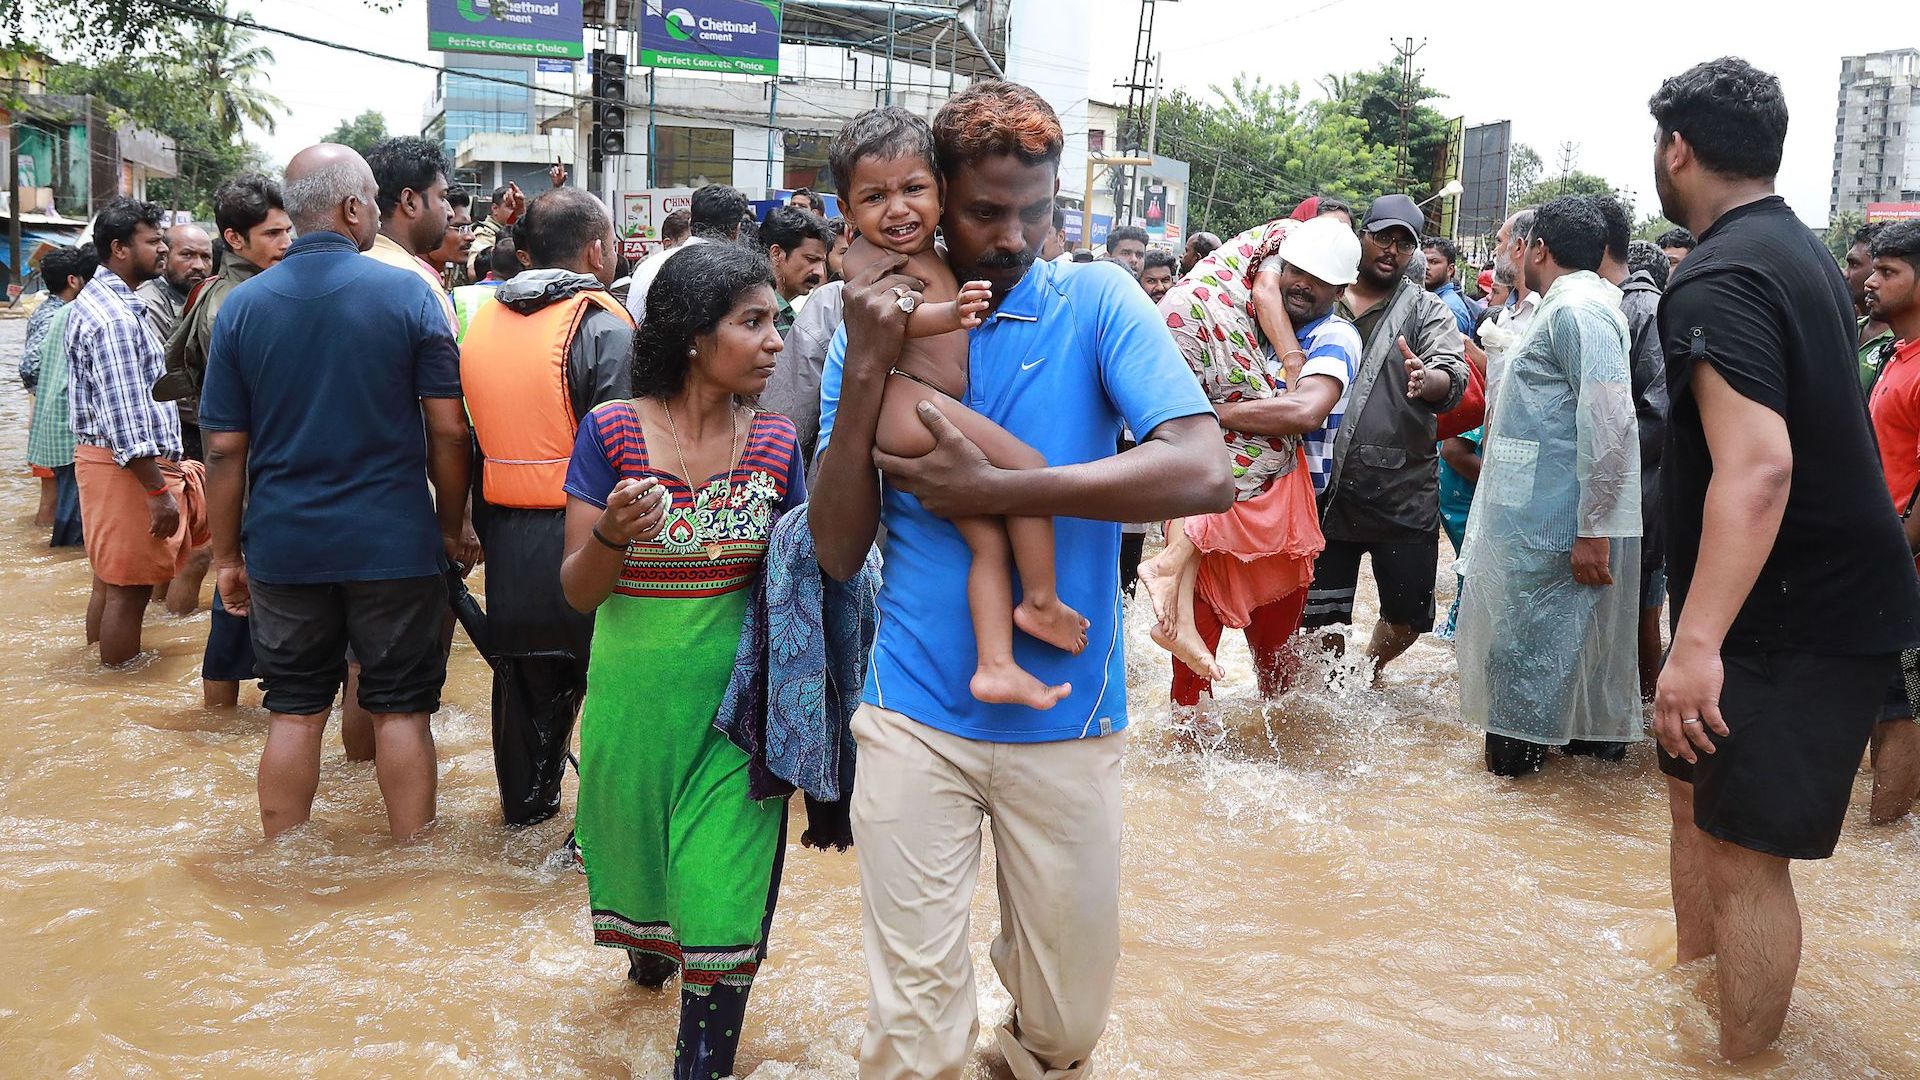 Indian volunteers and rescue personal evacuate local residents in a residential area at Aluva in Ernakulam district, in the Indian state of Kerala, on August 17, 2018.